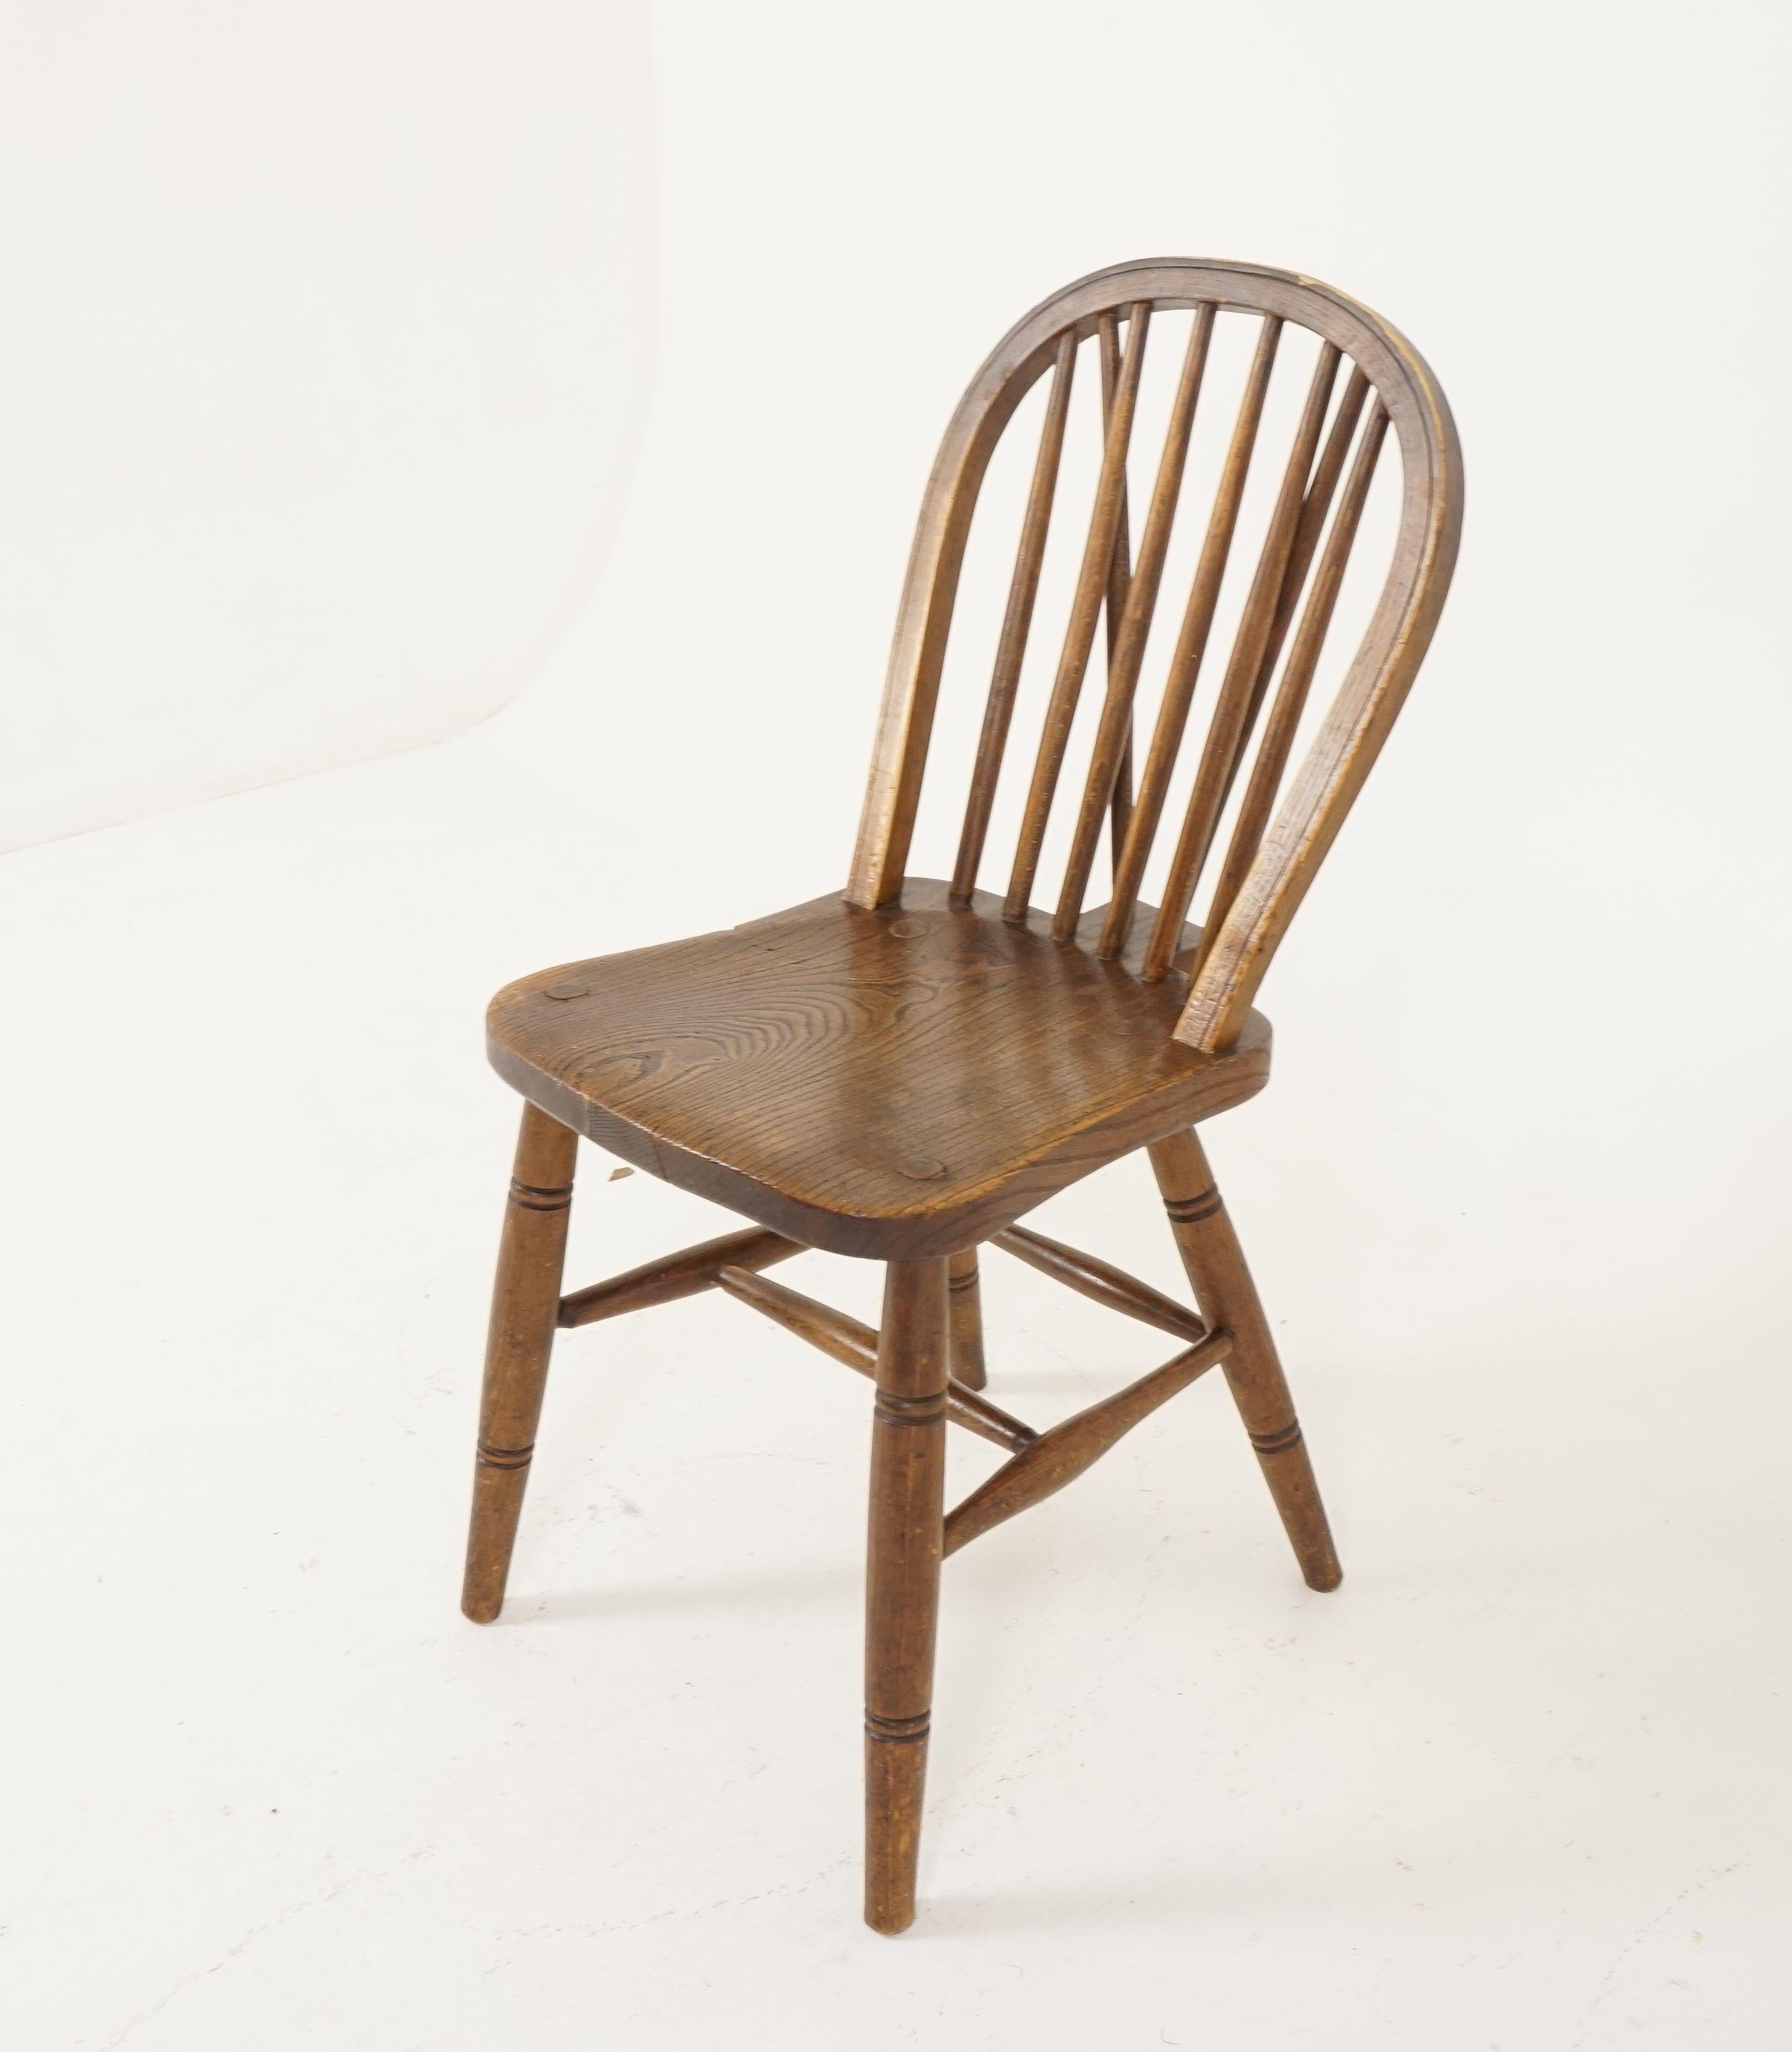 Antique single chair, Windsor kitchen chair, elm and ash, Scotland, 1900

Scotland, 1900
Solid elm and ash
Original finish
Hoop back with multi comb struts
Solid elm seat with the fish tail that has a pair of struts from the seat to the top